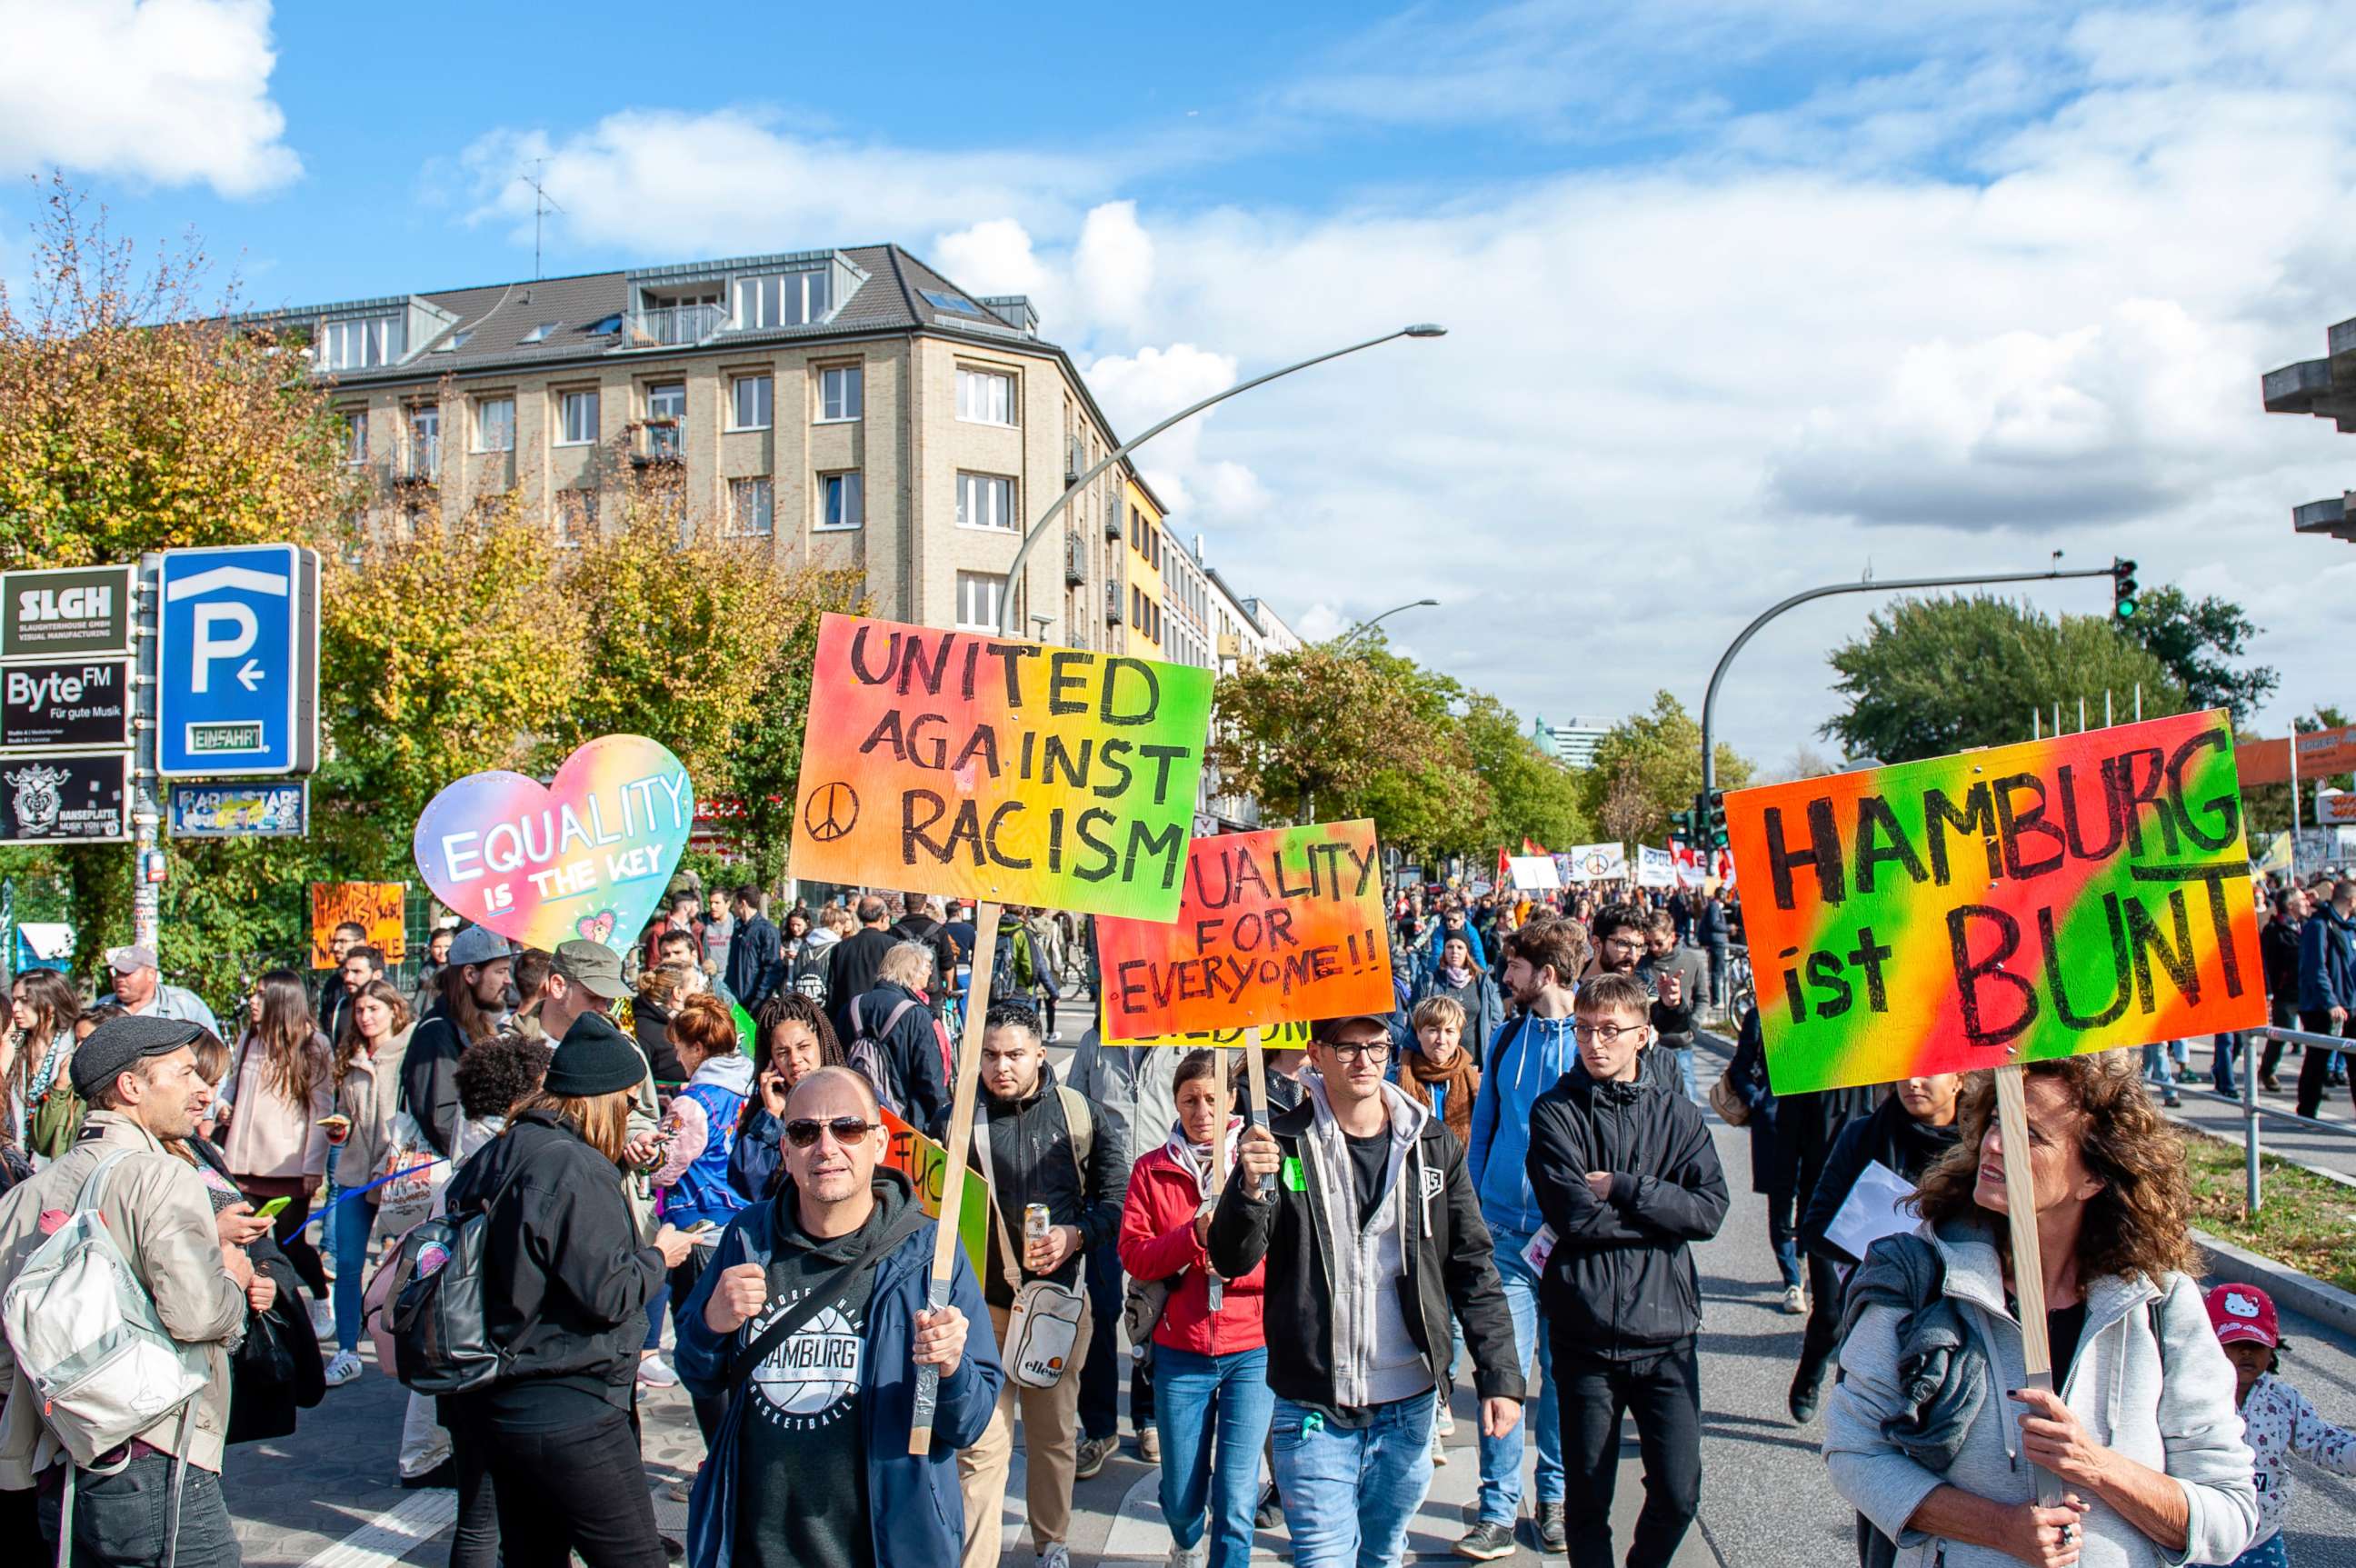 PHOTO: More than 400 initiatives call for a big demonstration under the slogan 'United Against Racism' on Sept. 29, 2018 in Hamburg, Germany.